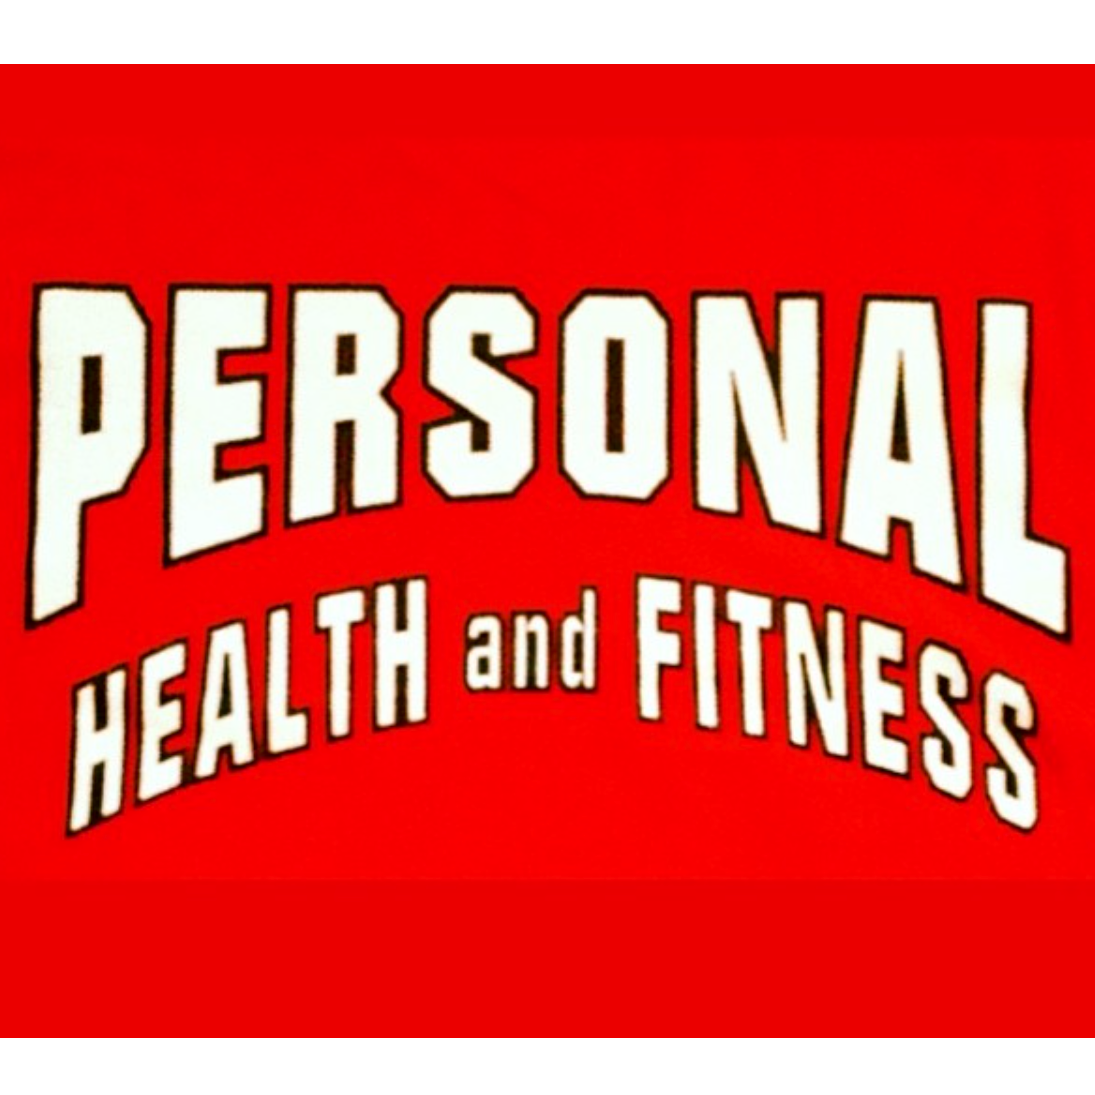 Personal Health and Fitness Logo